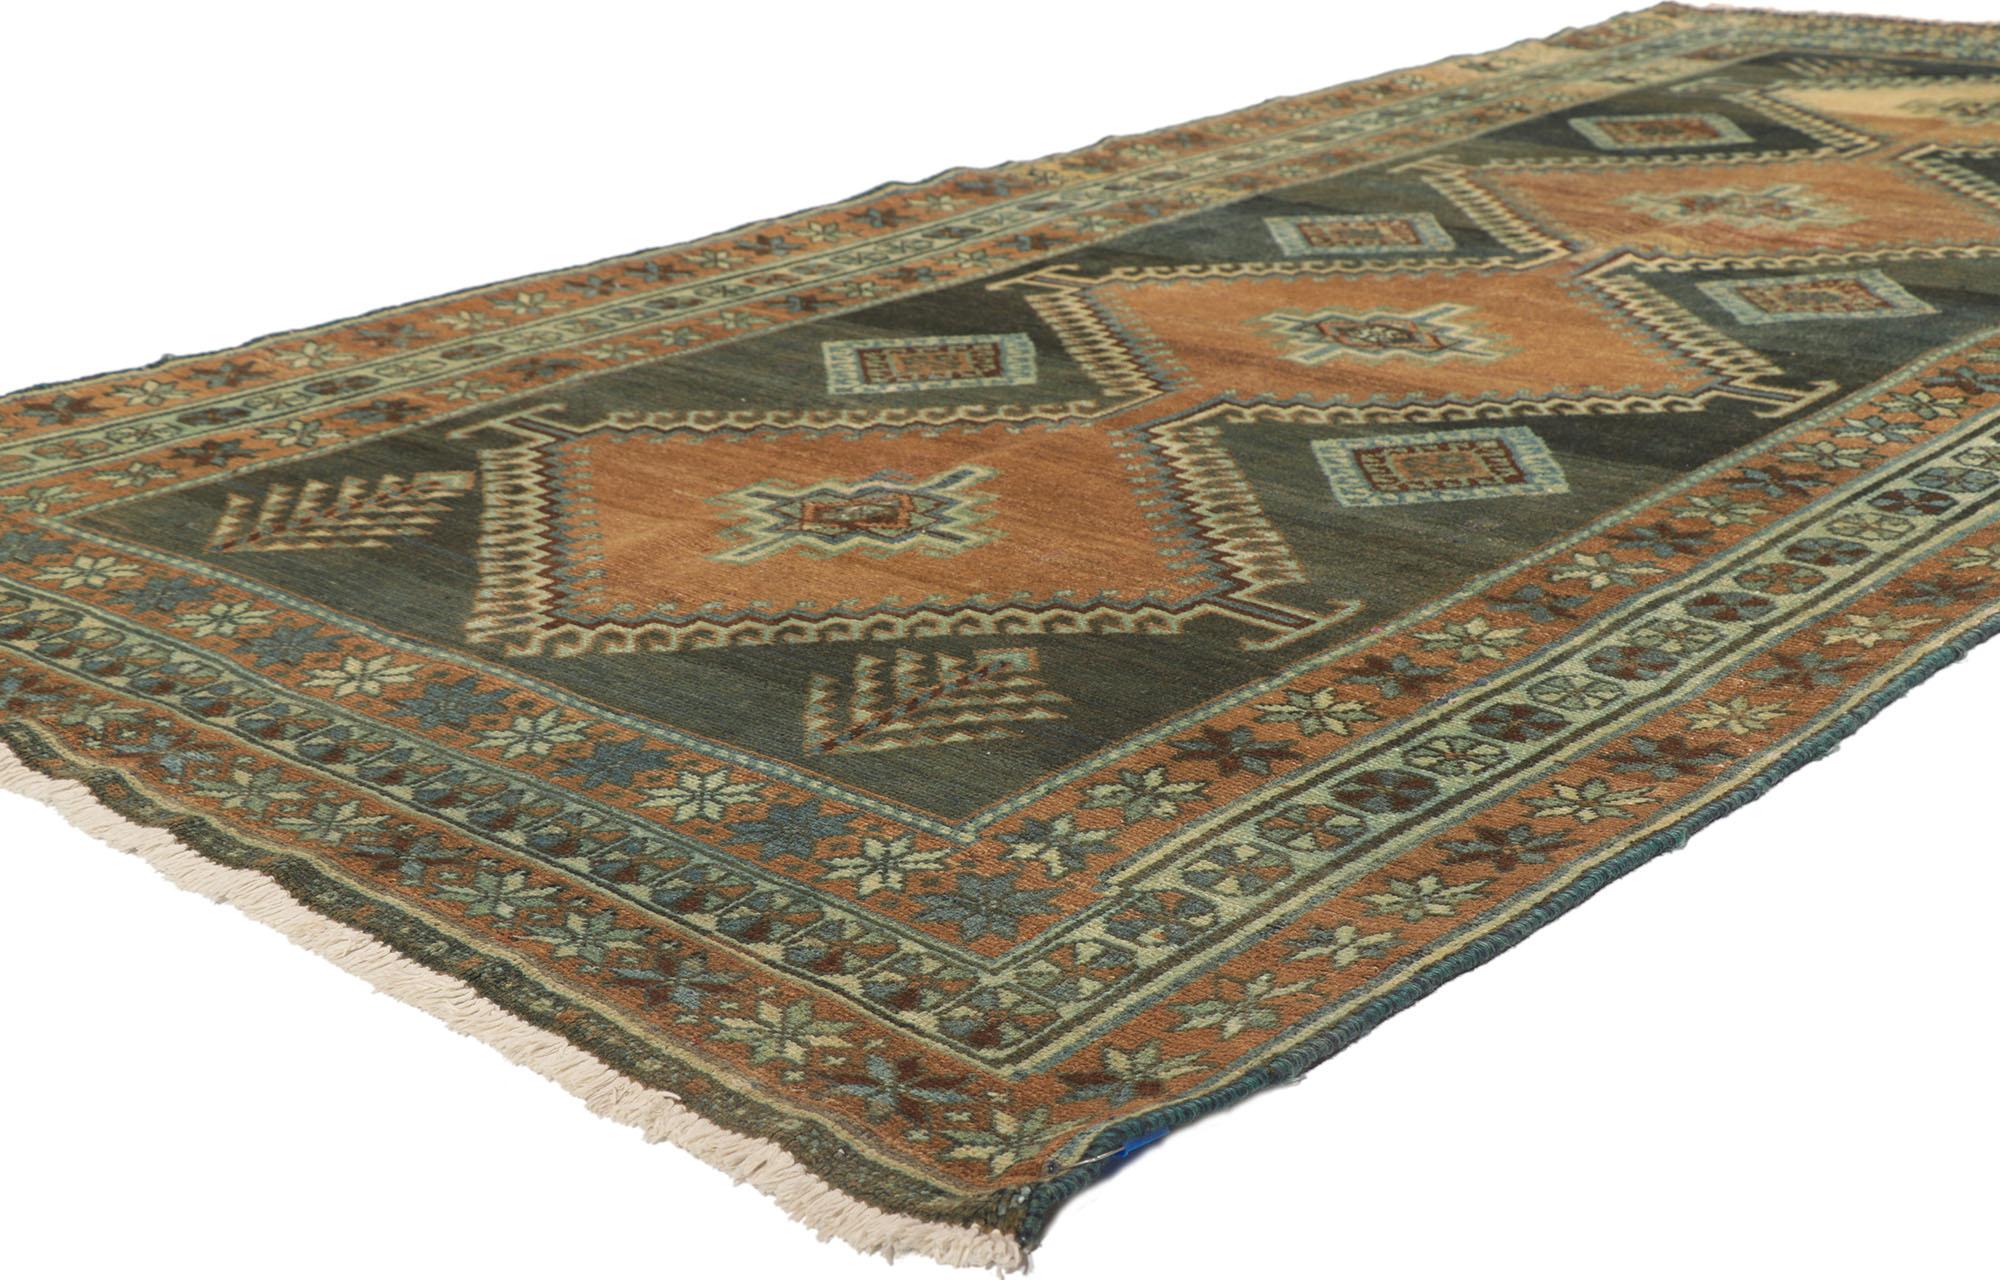 53734 Antique Persian Malayer Rug, 04'08 x 09'01. Infusing a space with traditional sensibility and tribal design elements, this hand-knotted wool distressed antique Persian Malayer gallery rug effortlessly harmonizes with a variety of interior